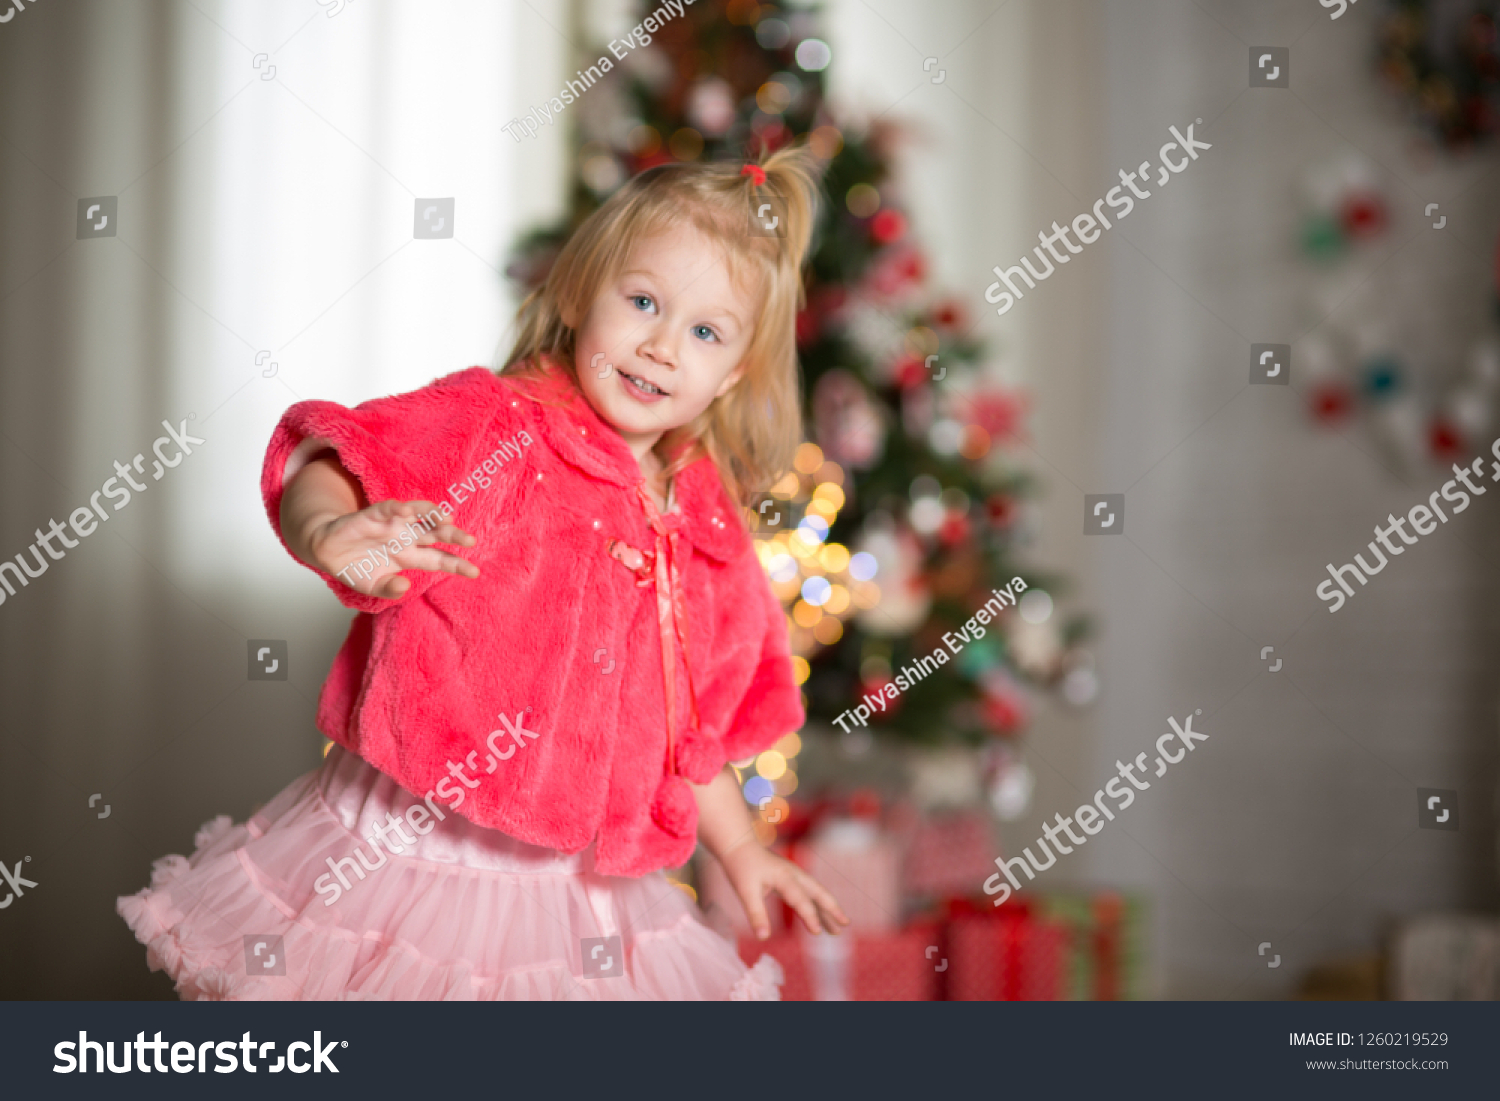 Little Girl Two Years Old Room Stock Photo 1260219529 | Shutterstock